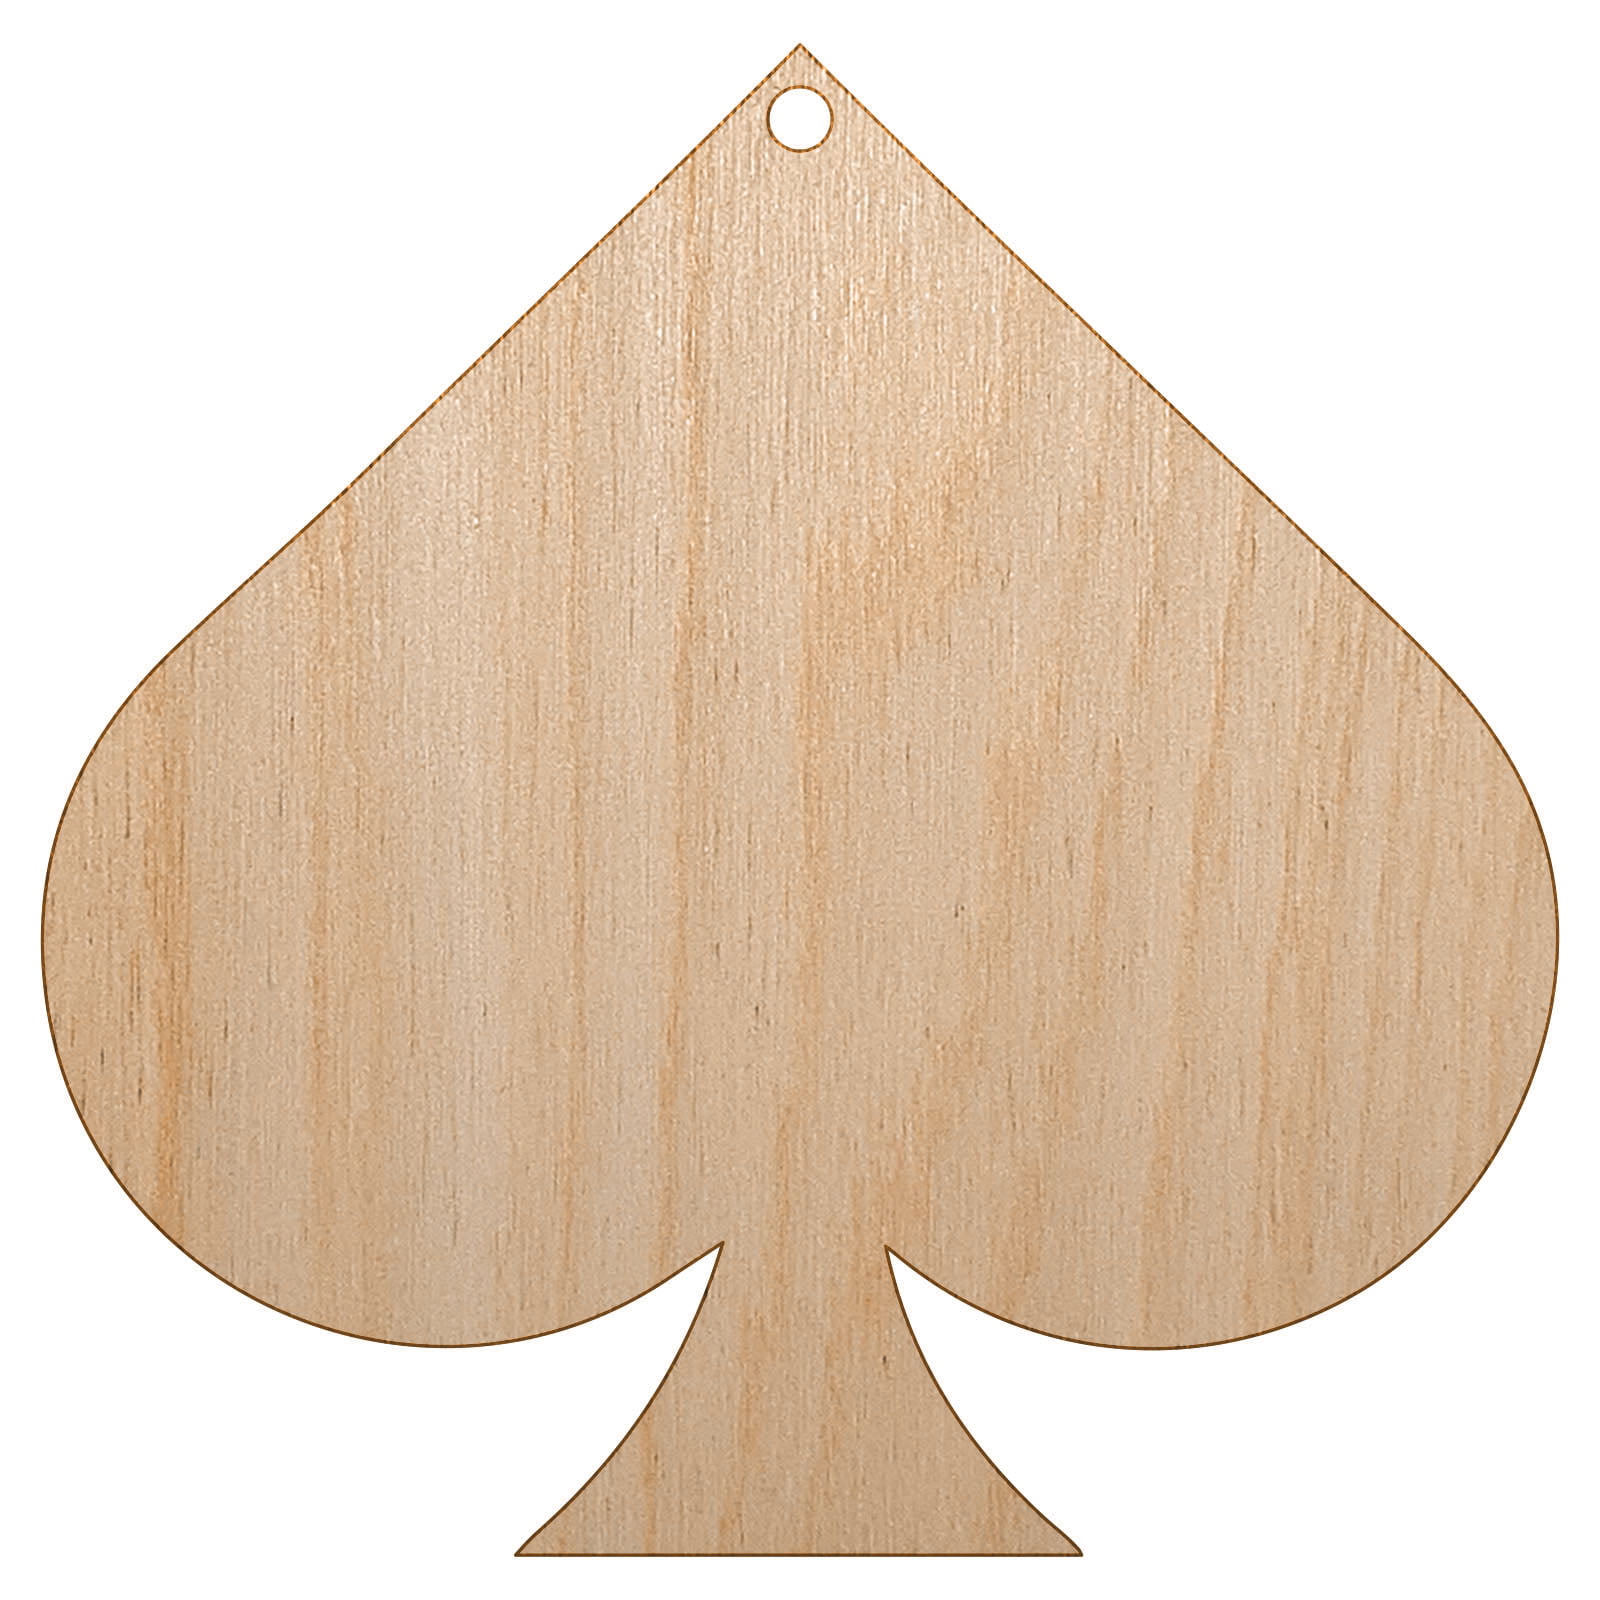 Card Suit Spades Wood Holiday Christmas Tree Ornament Unfinished DIY ...